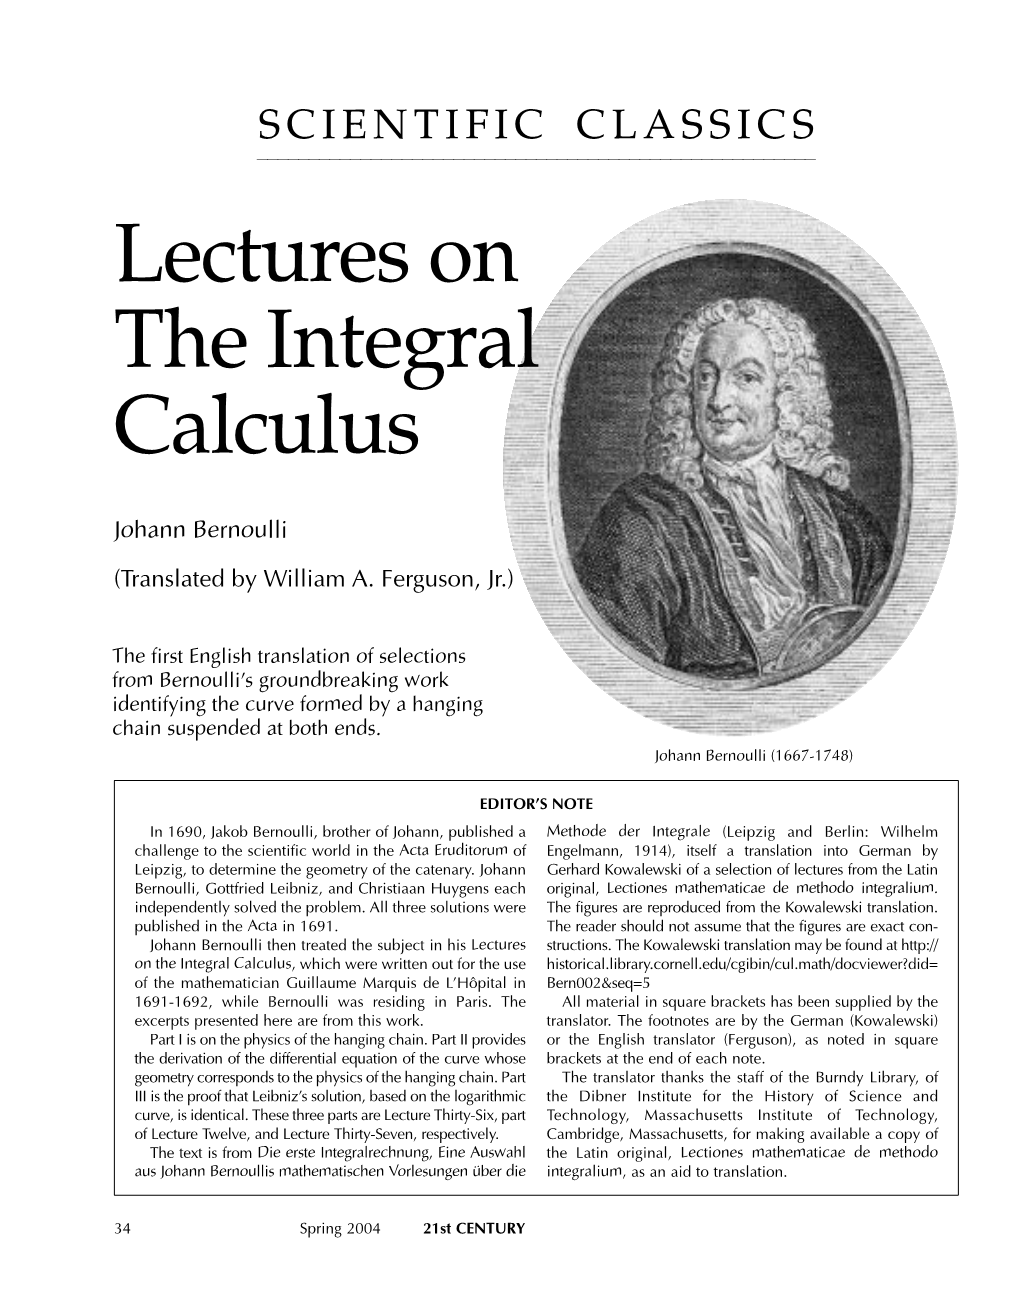 Lectures on the Integral Calculus